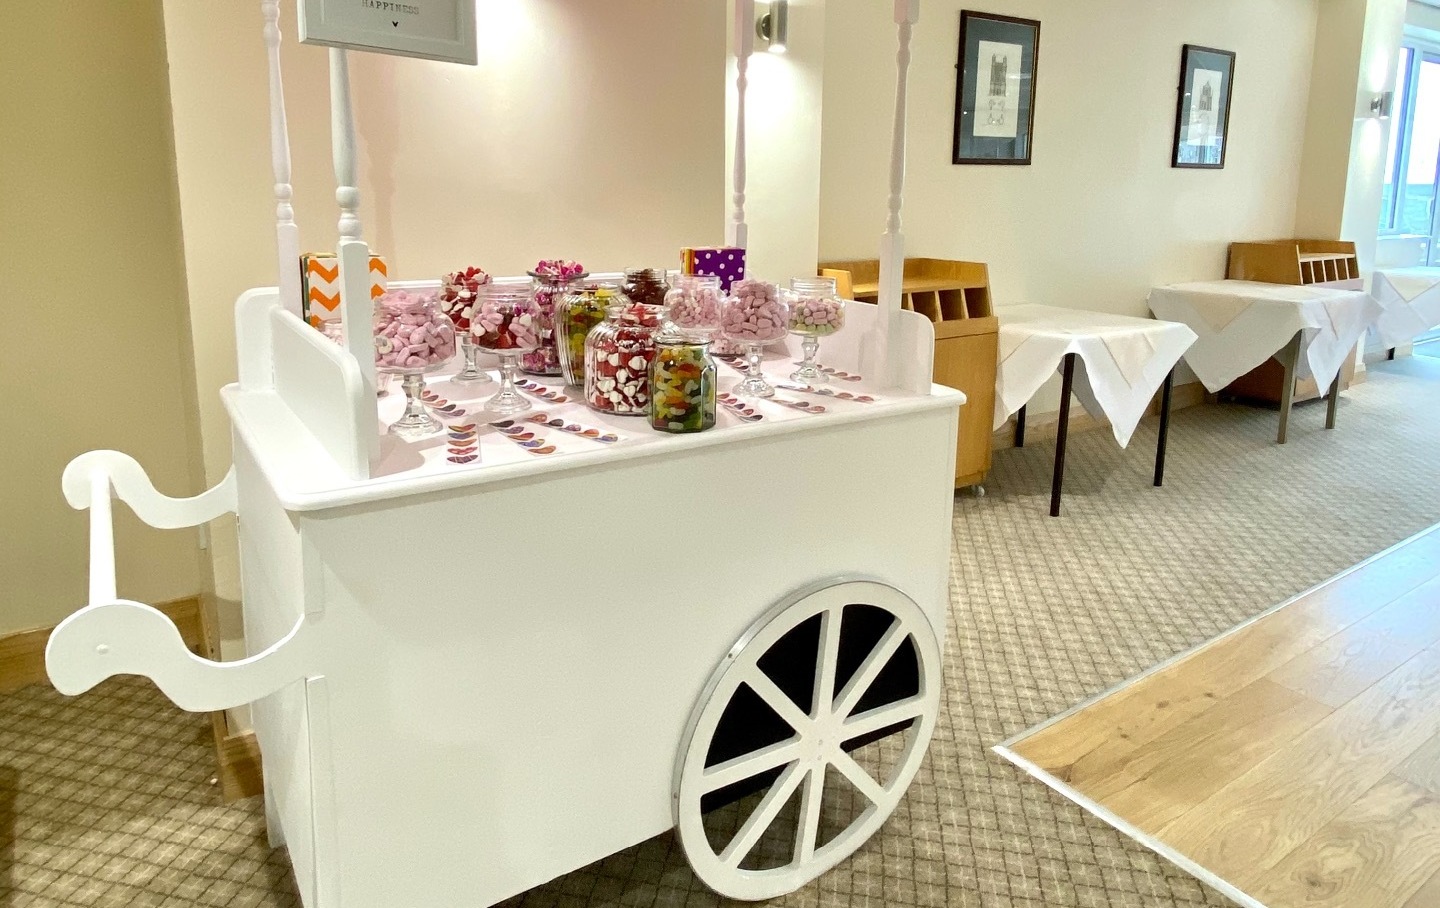 Sweets trolley for the wedding party